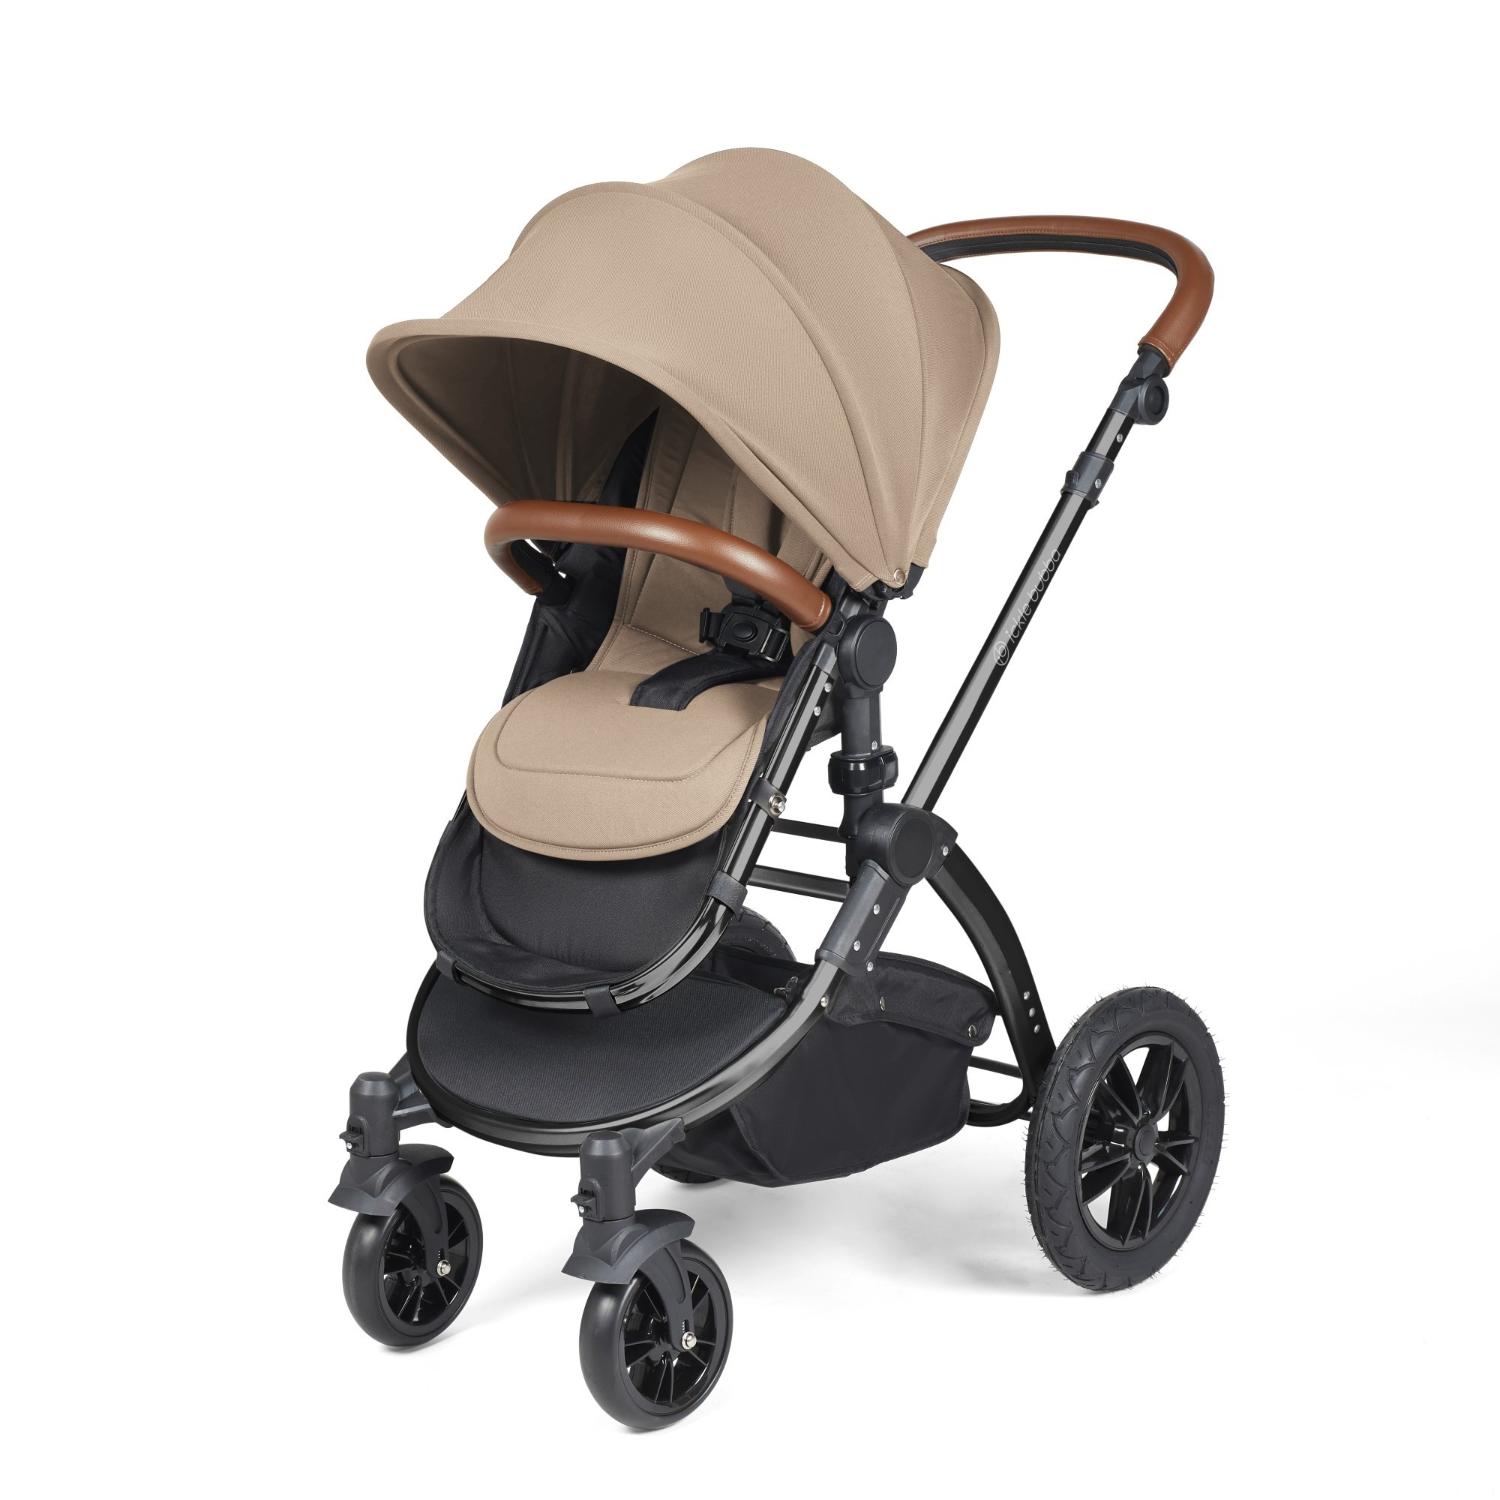 Ickle Bubba Stomp Luxe Pushchair with seat unit attached in Desert beige colour with tan handle